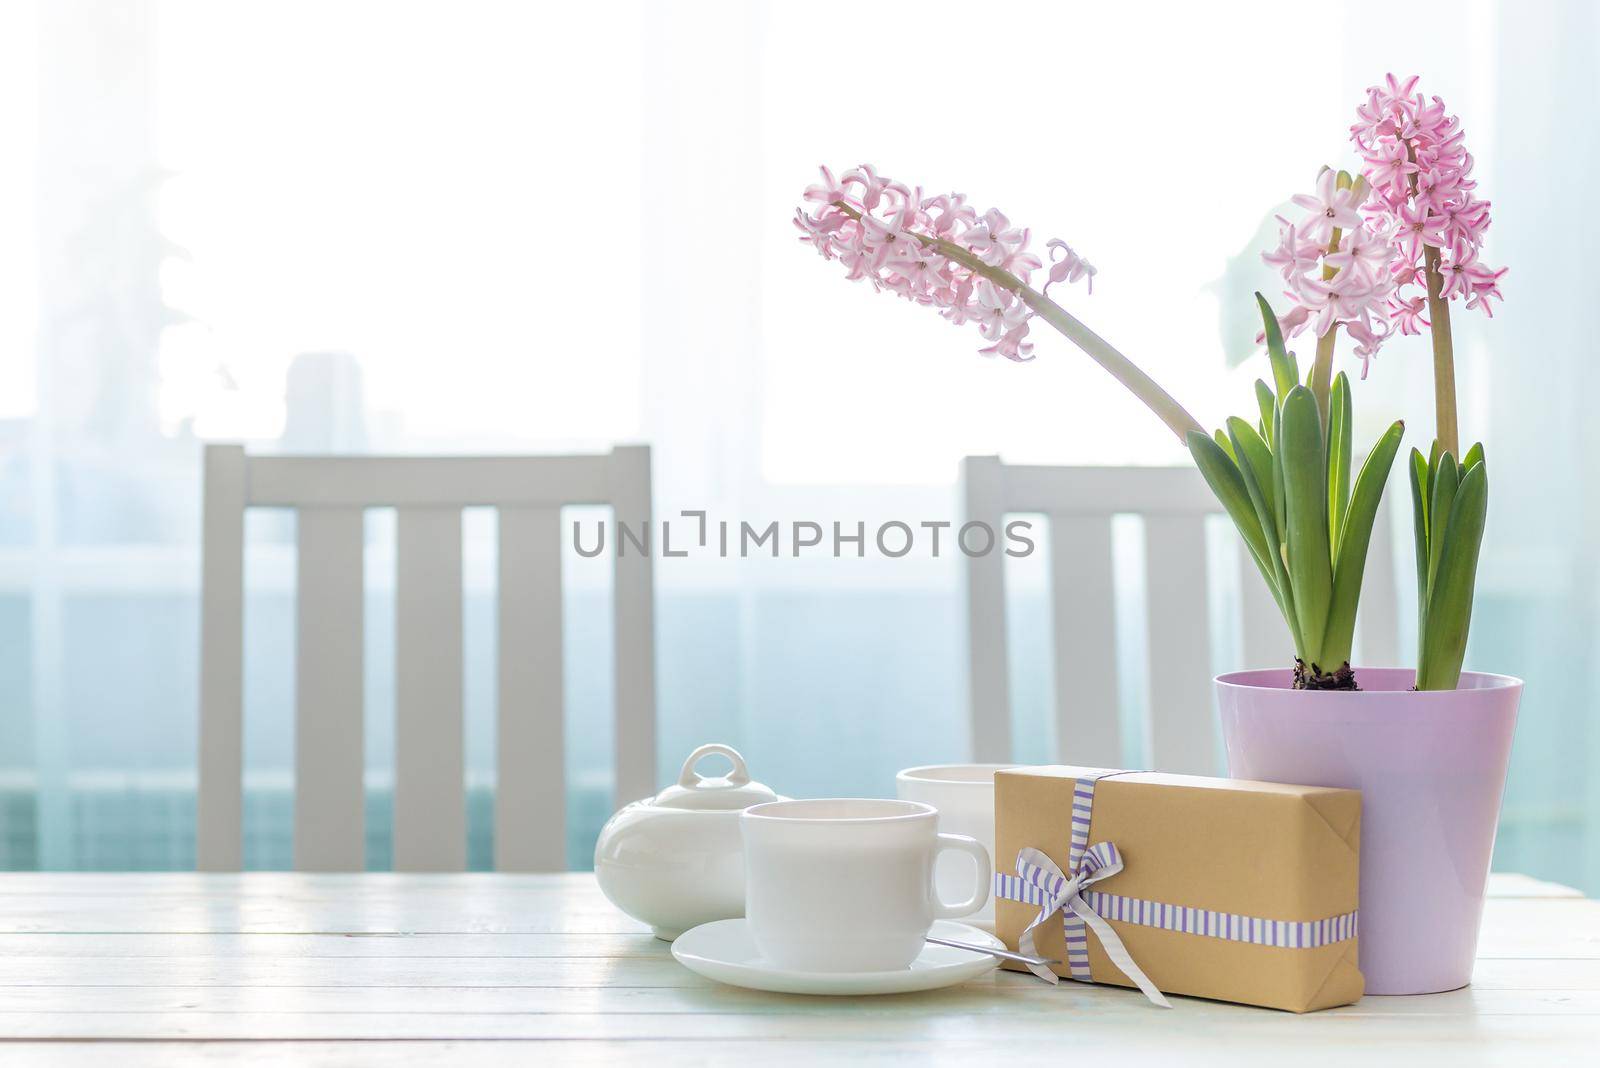 Present box with cups and flowers on the table by tan4ikk1